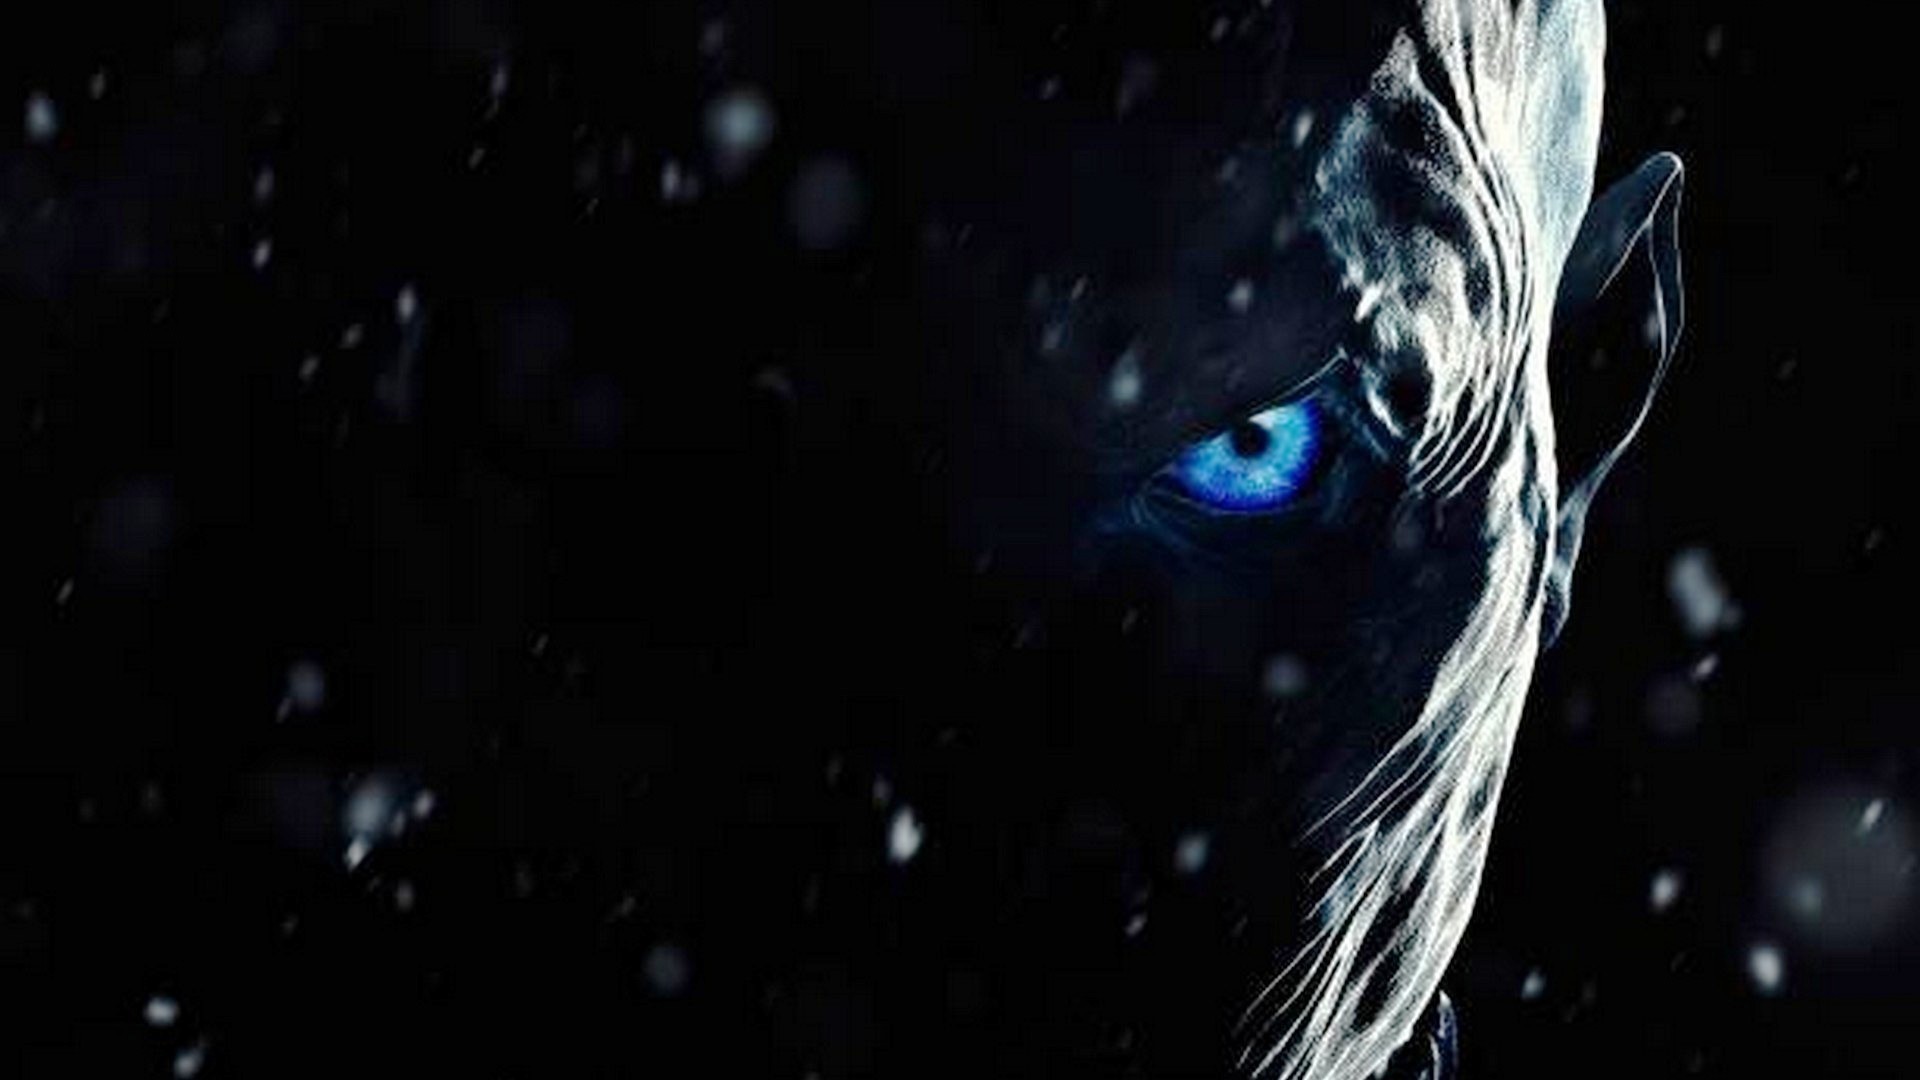 Game of Thrones Wallpaper Movie with high-resolution 1920x1080 pixel. You can use this poster wallpaper for your Desktop Computers, Mac Screensavers, Windows Backgrounds, iPhone Wallpapers, Tablet or Android Lock screen and another Mobile device